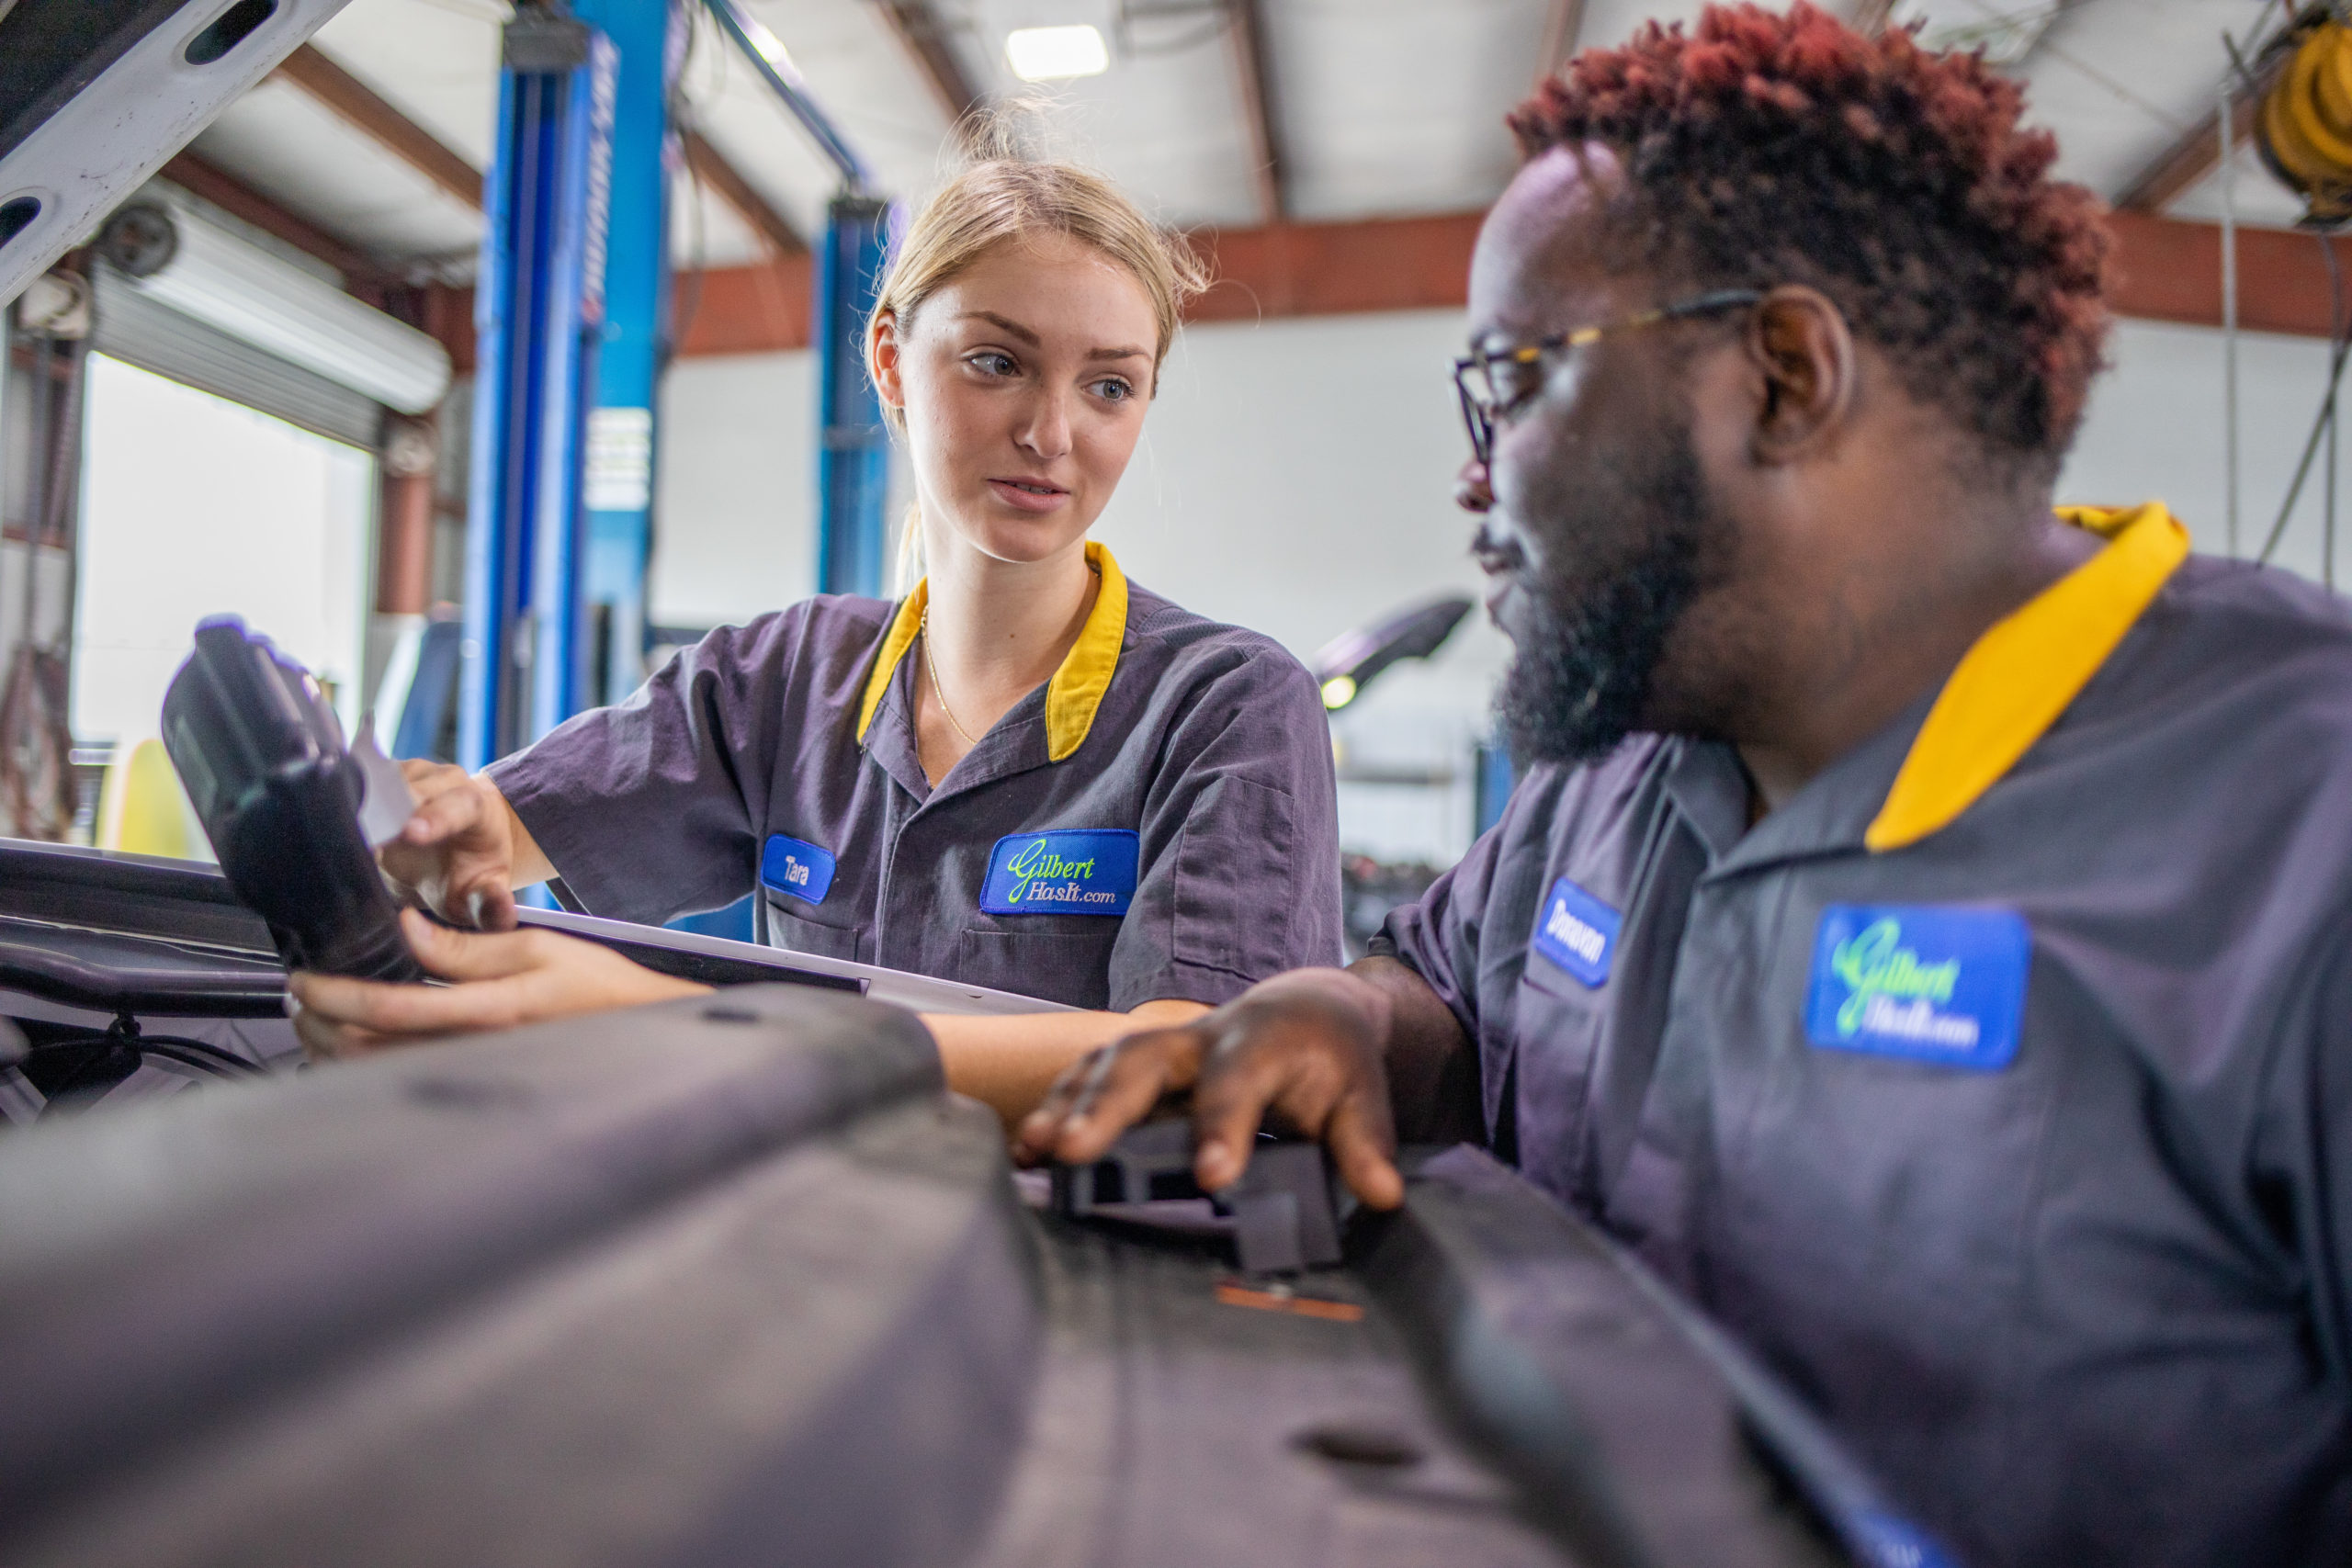 Chevy Service Tech Tara Hunt collaborates with co-worker at Gilbert Chevrolet in Okeechobee